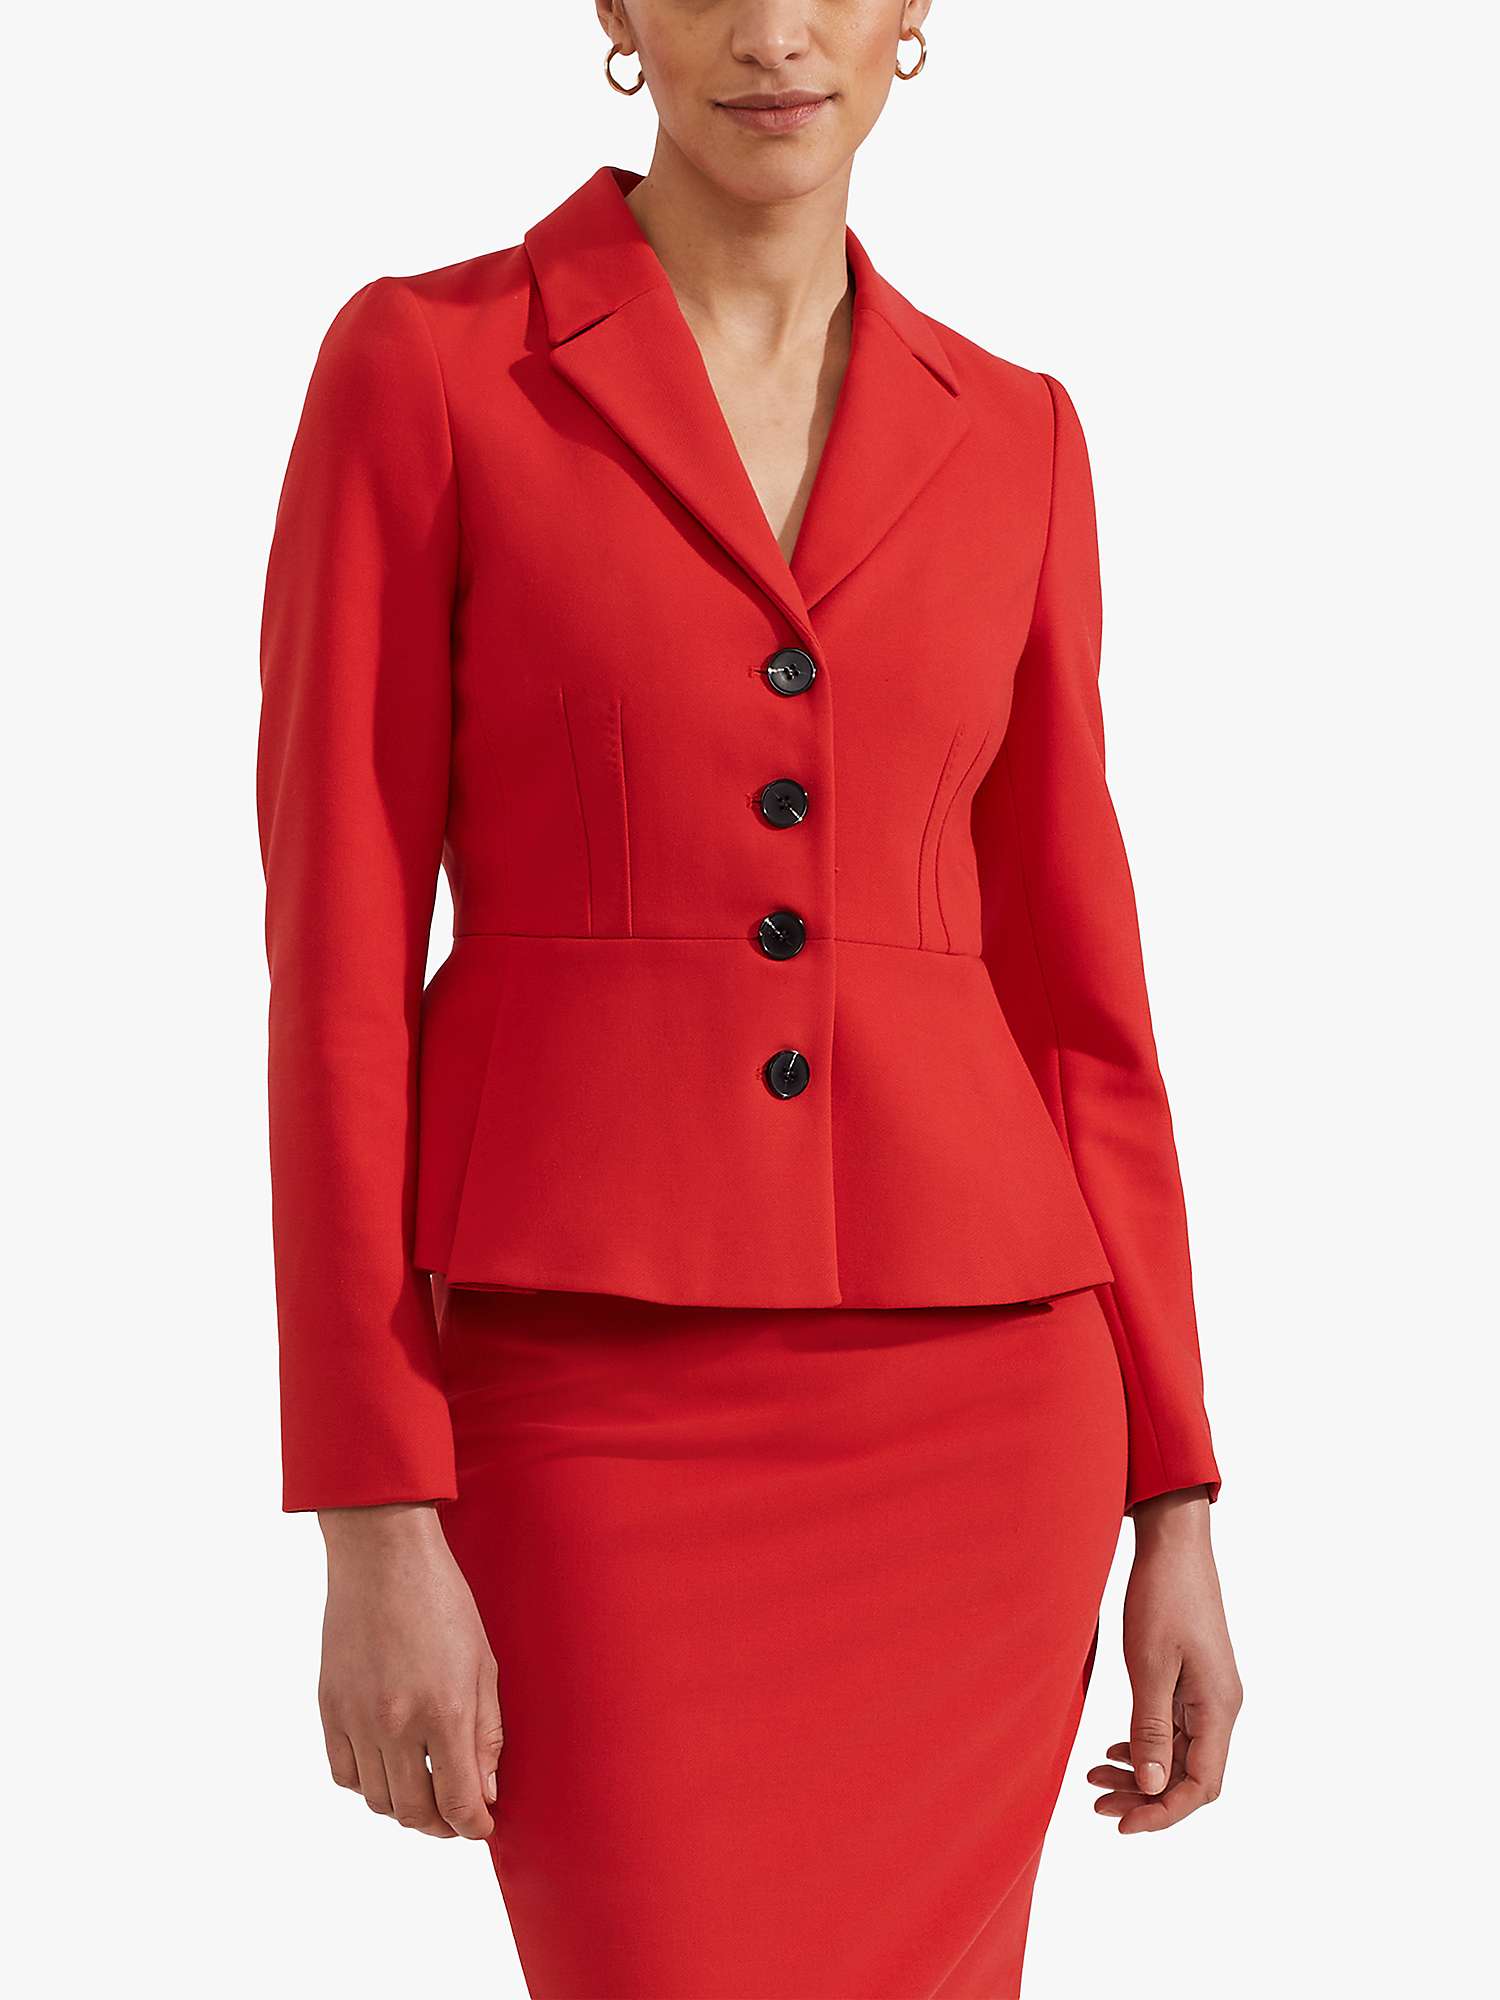 Buy Hobbs Brielle Tailored Jacket, Cherry Red Online at johnlewis.com